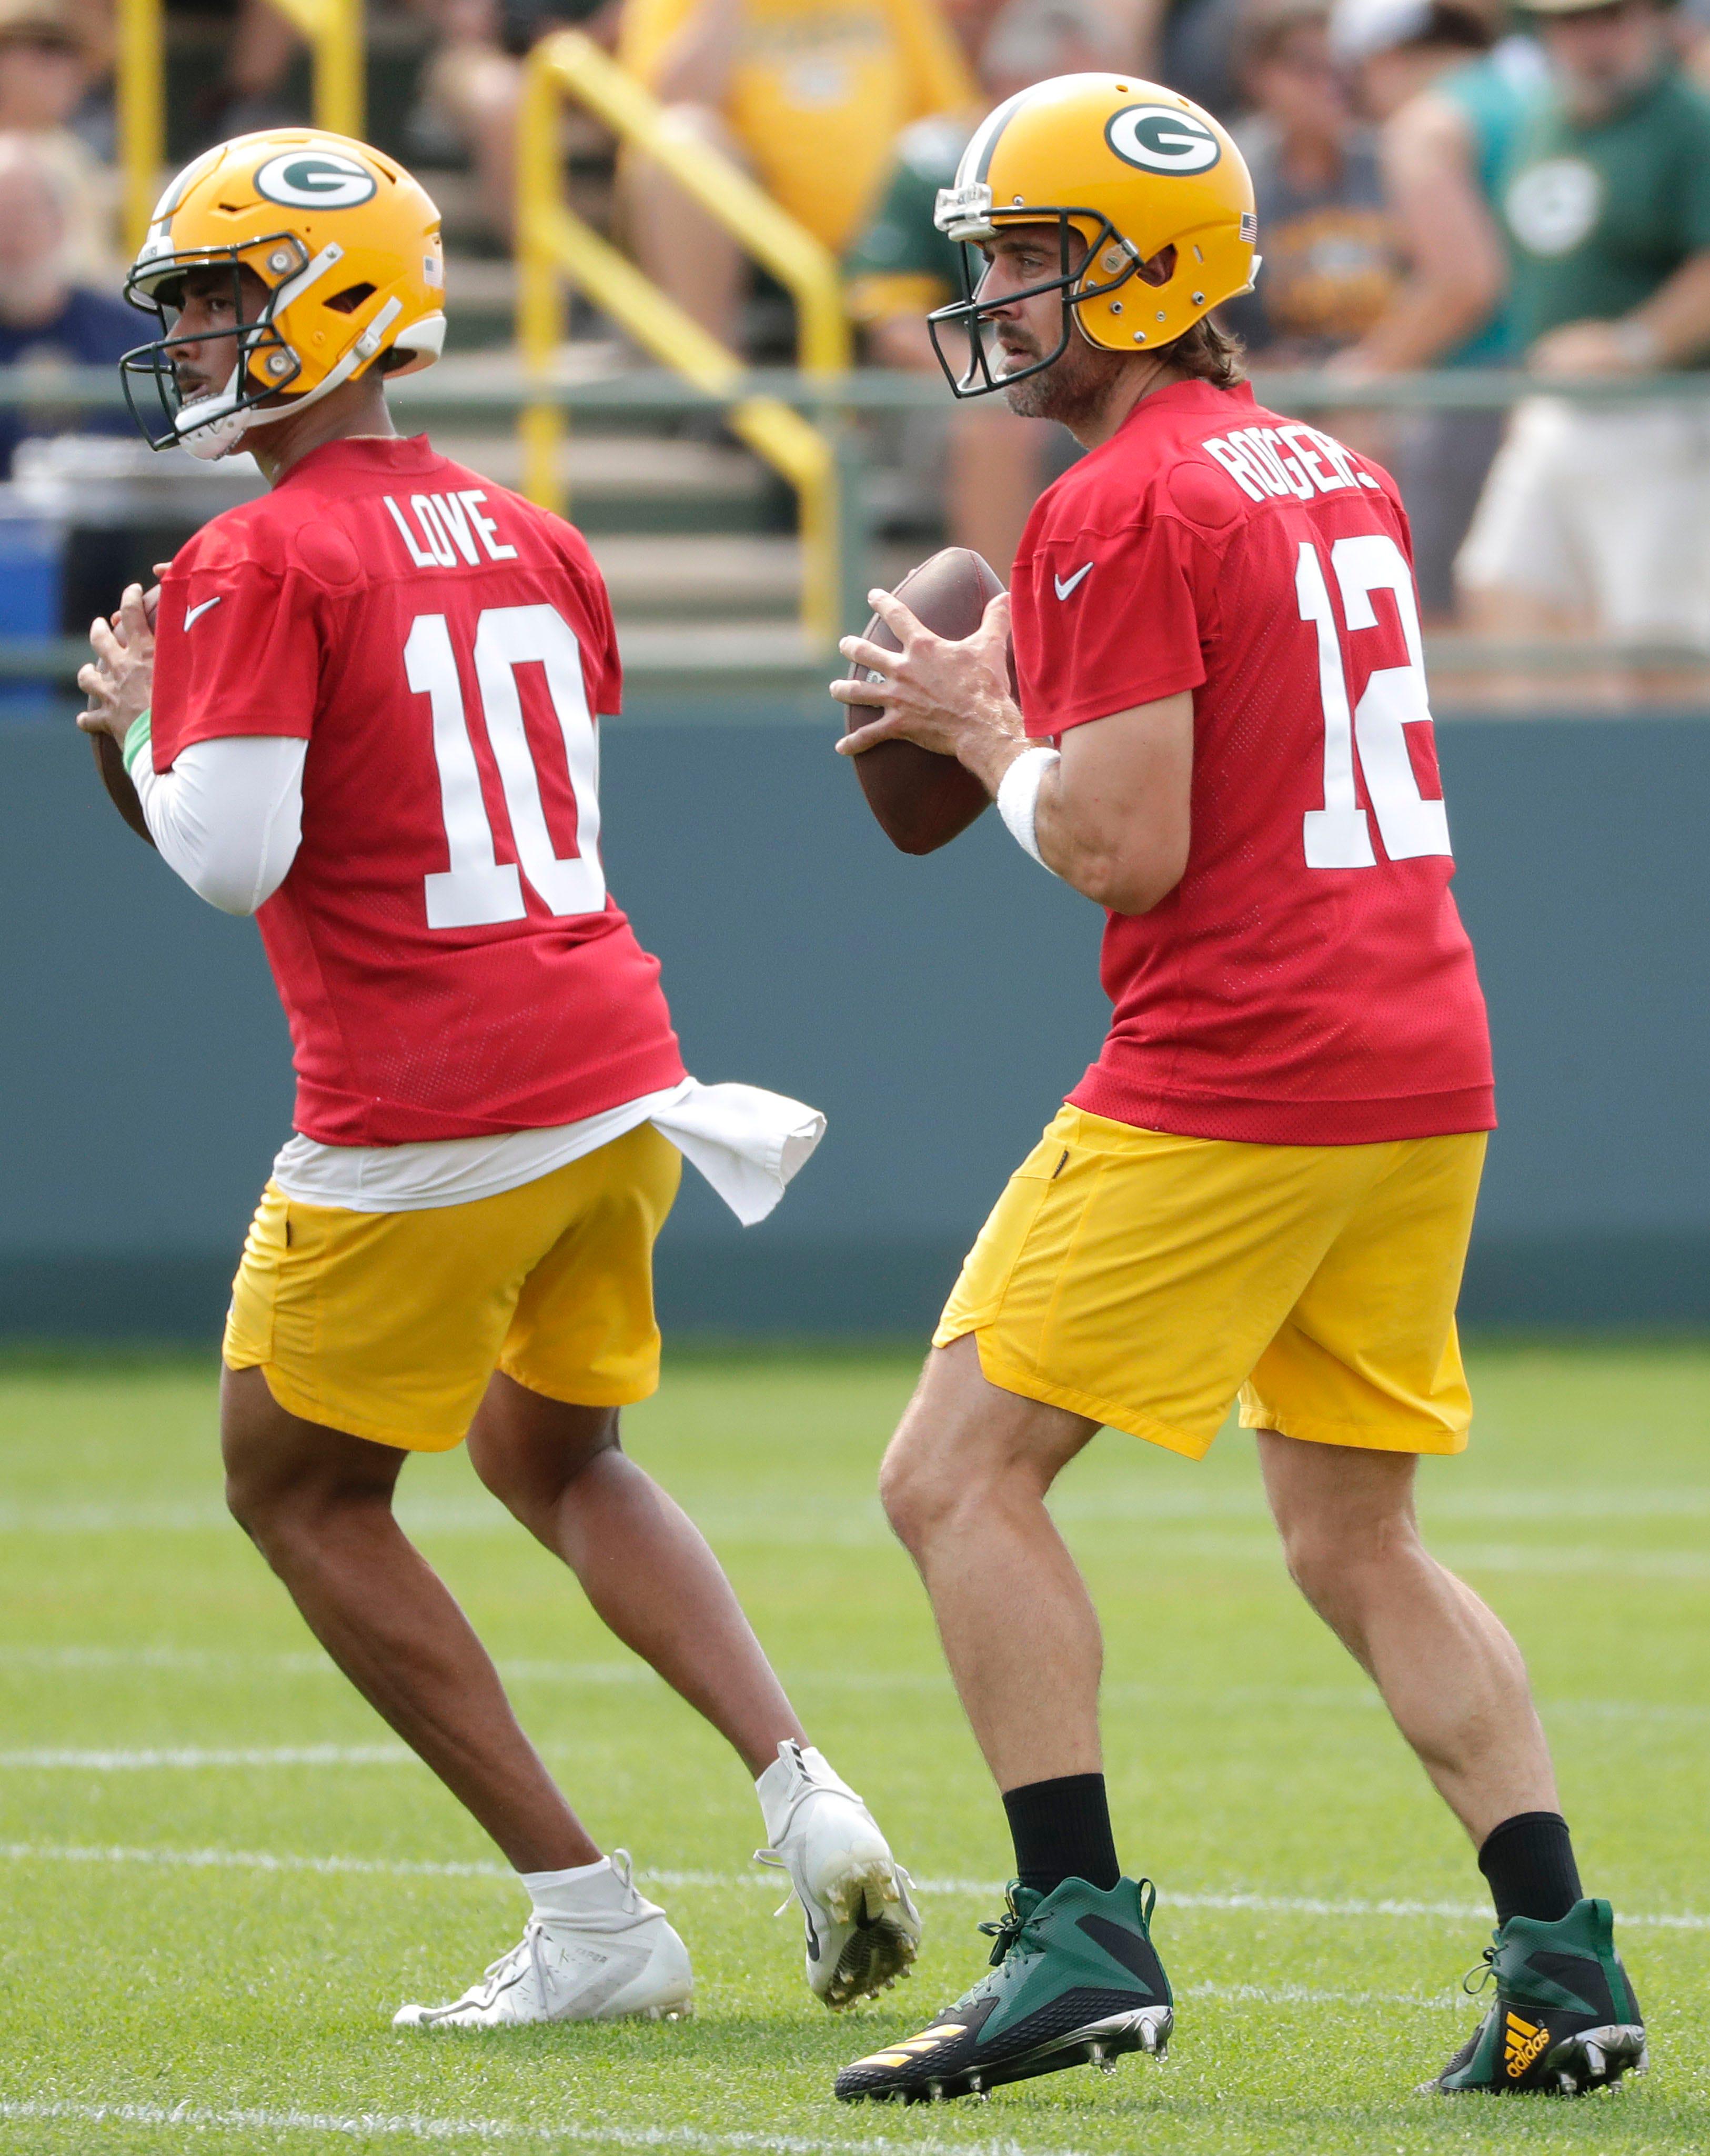 Packers Schedule for 2022 Offseason Workouts, OTAs & Minicamp Revealed